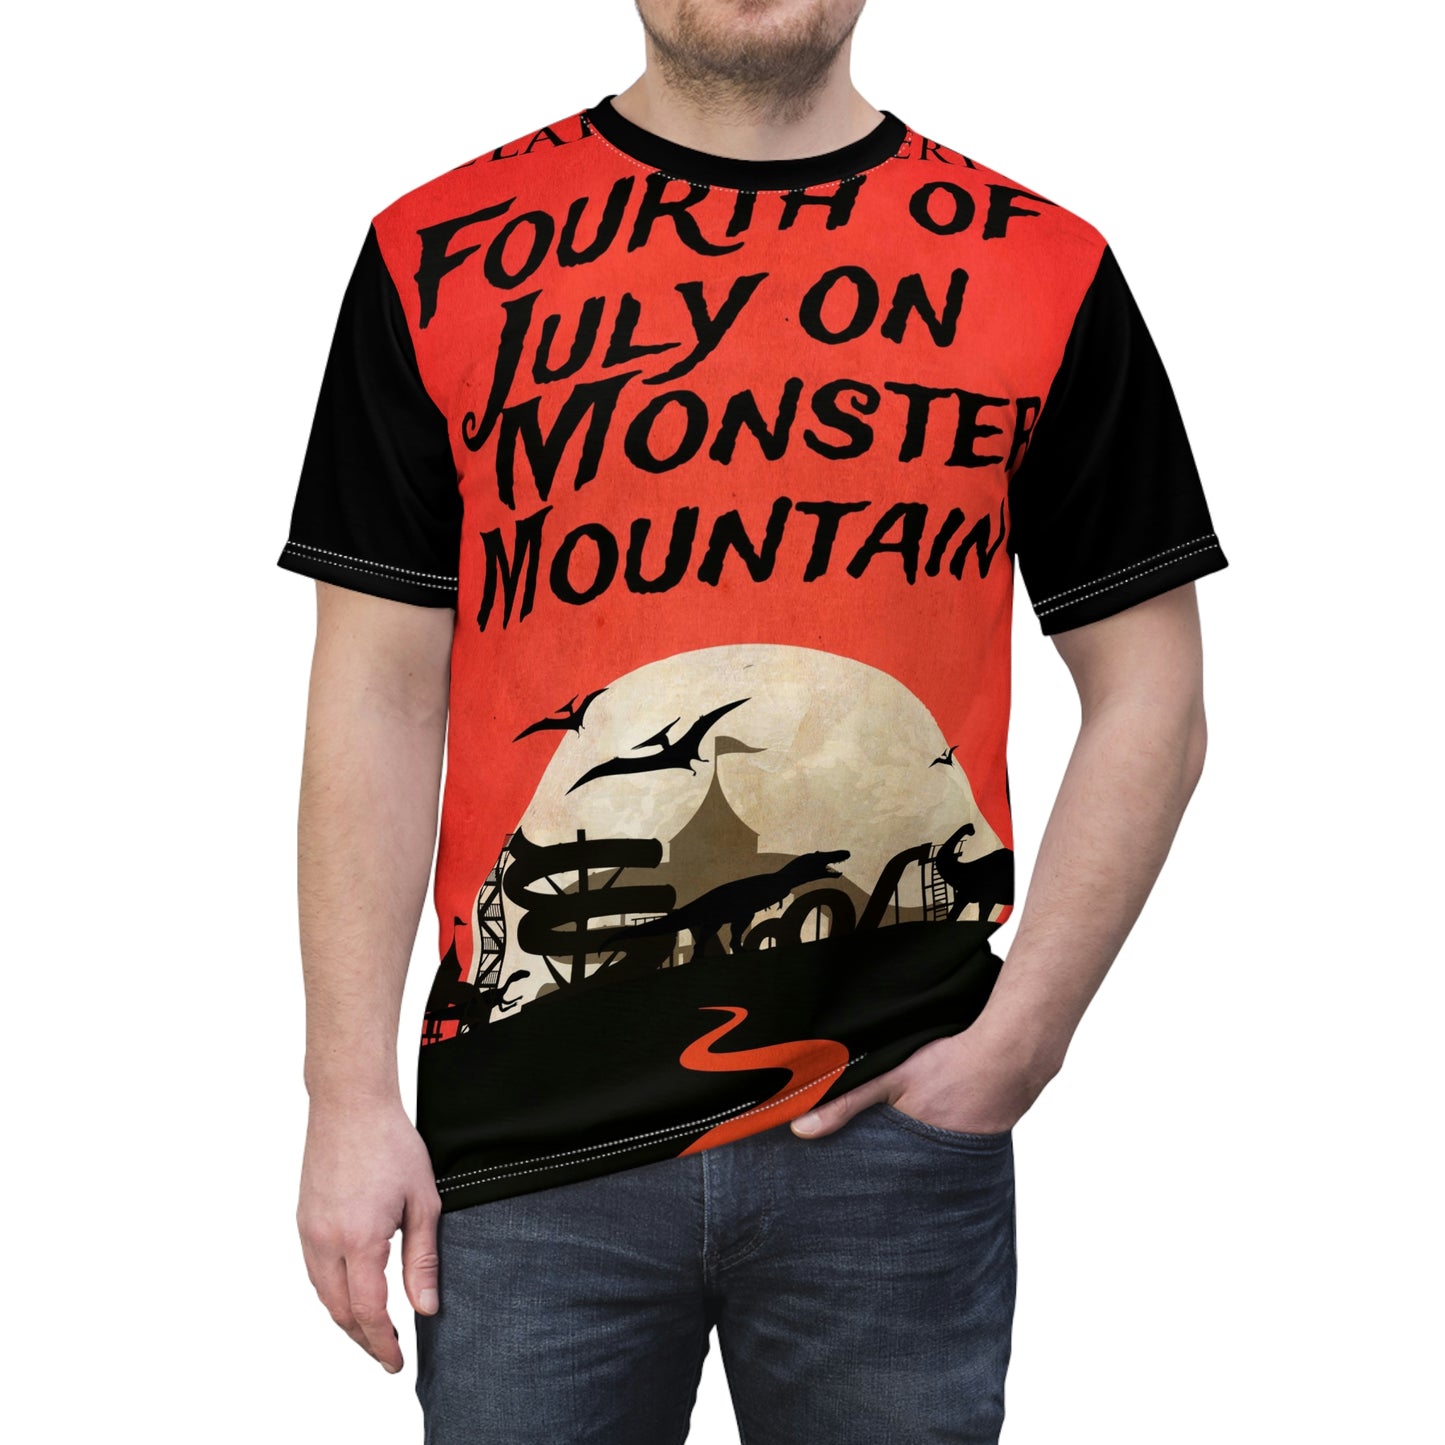 Fourth of July on Monster Mountain - Unisex All-Over Print Cut & Sew T-Shirt